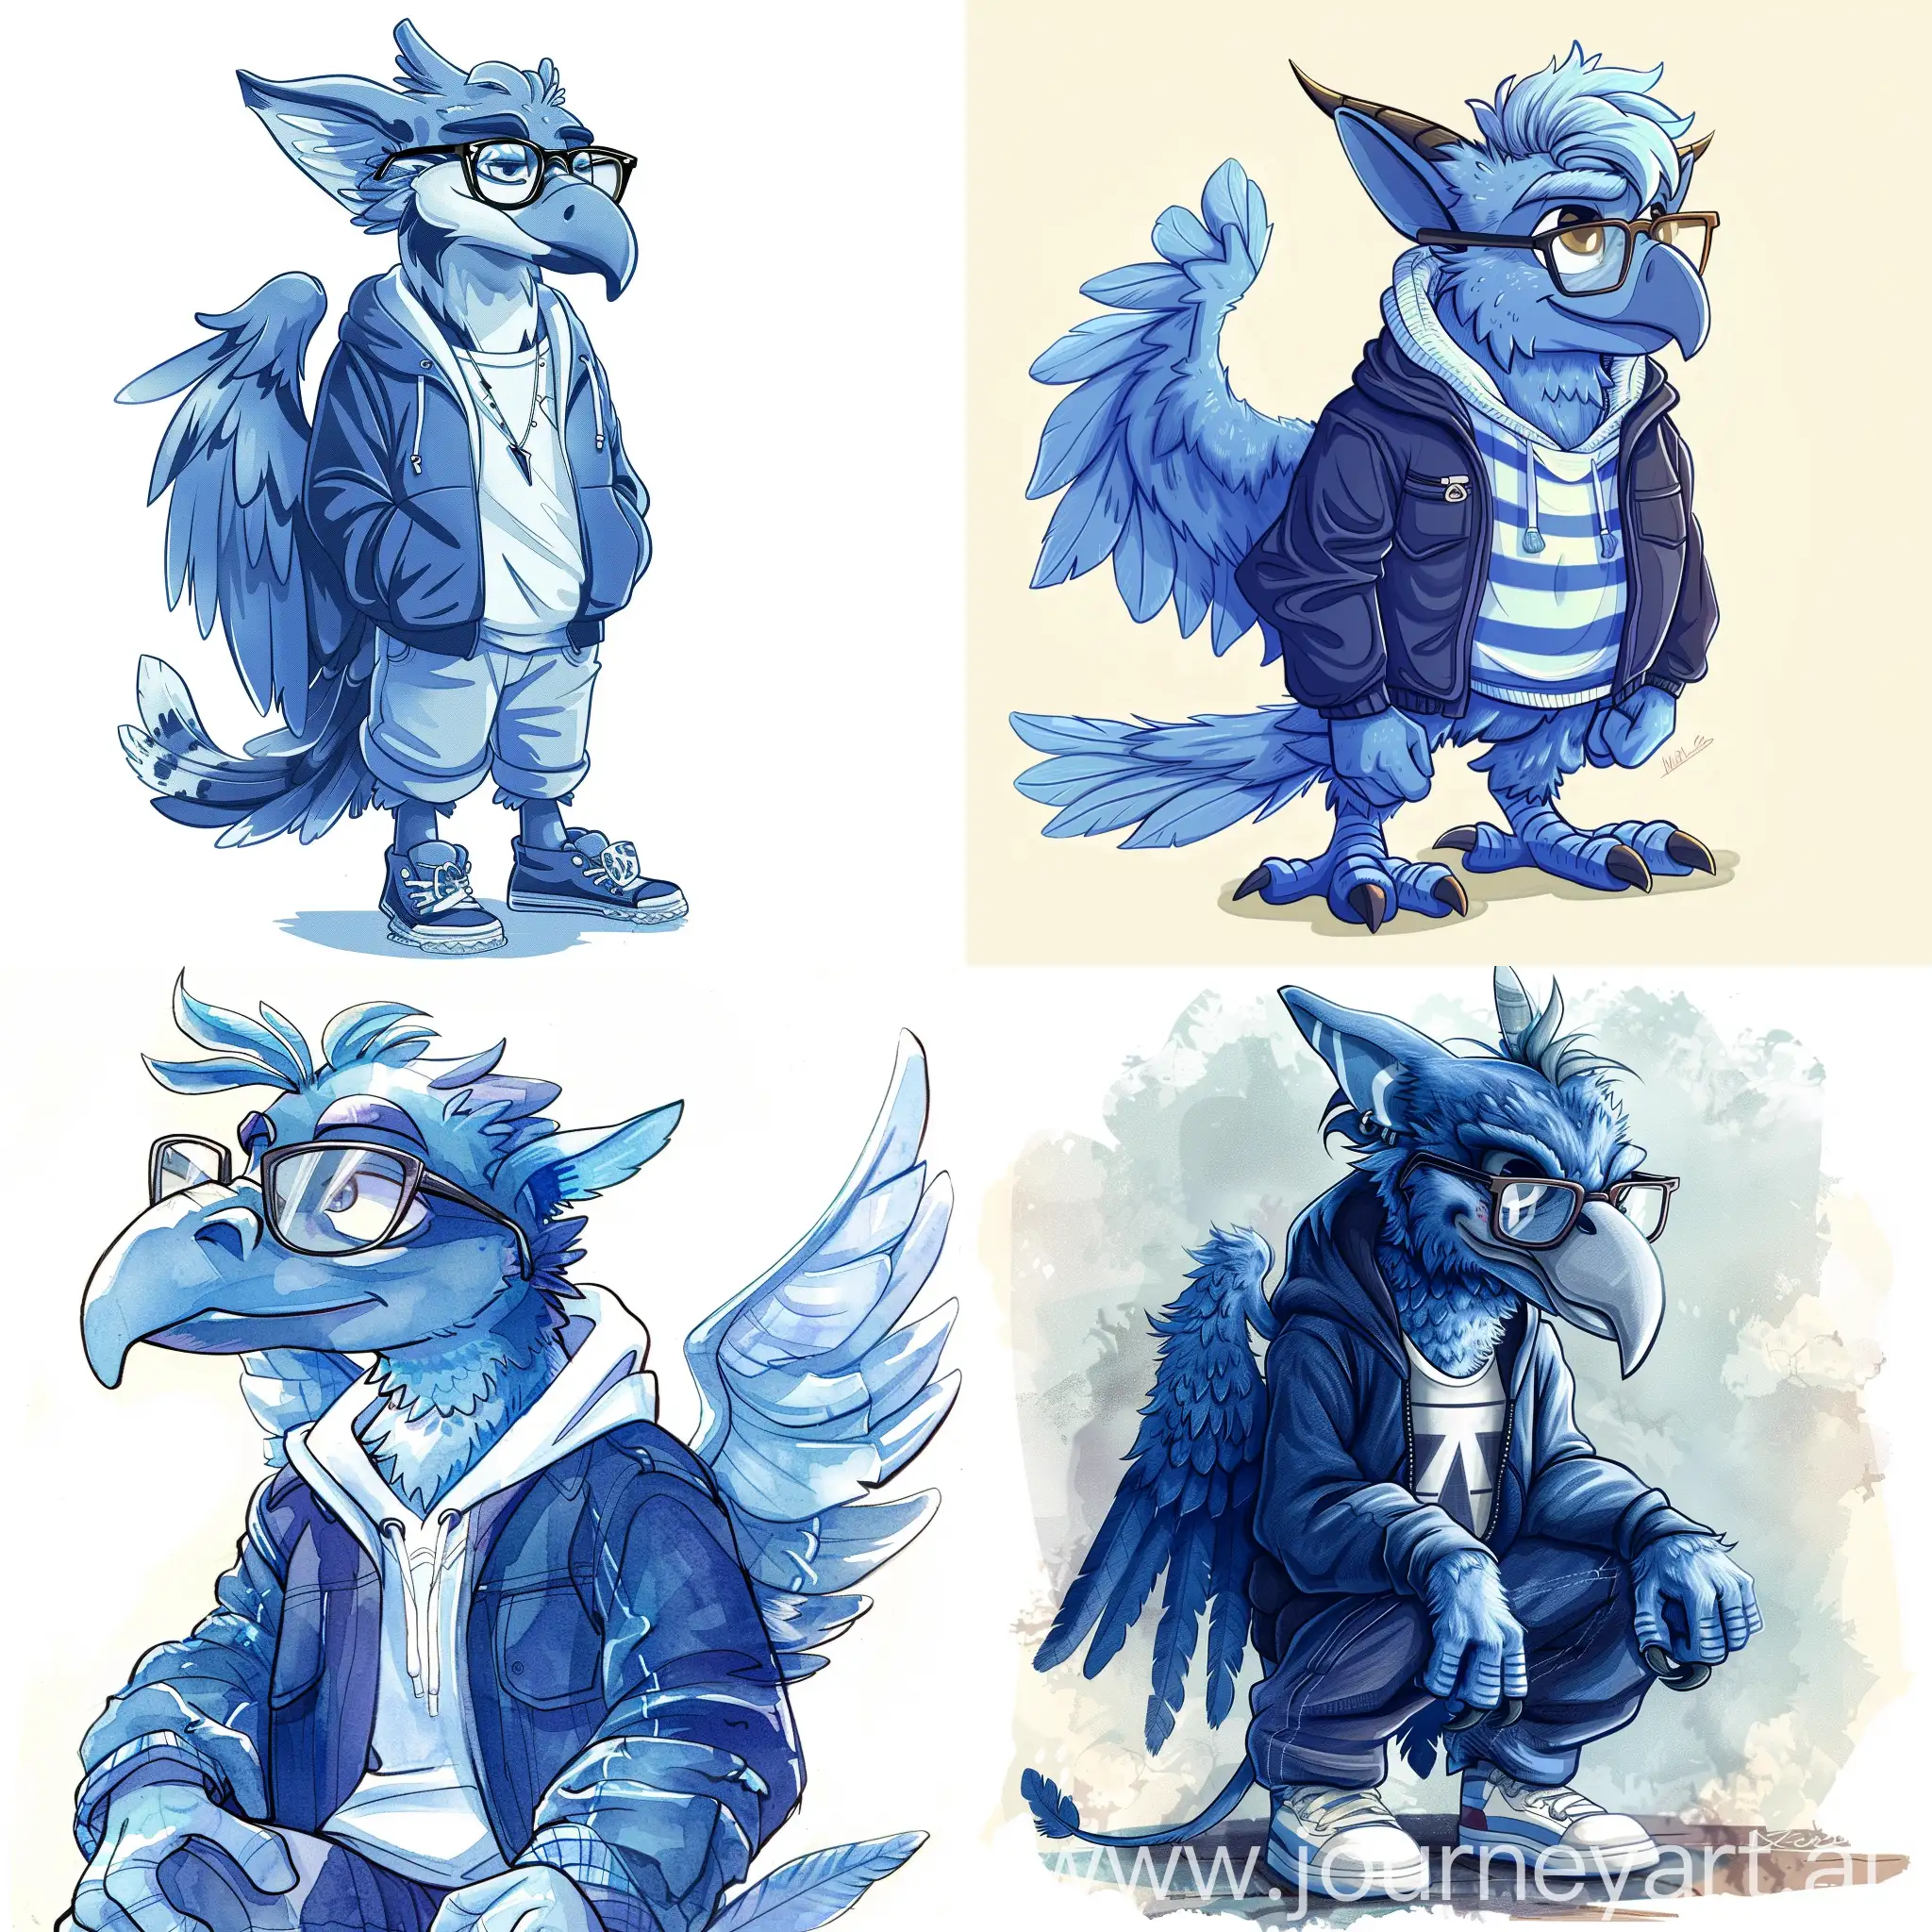 Stylish-Teenage-Griffin-in-Blue-Clothing-and-Glasses